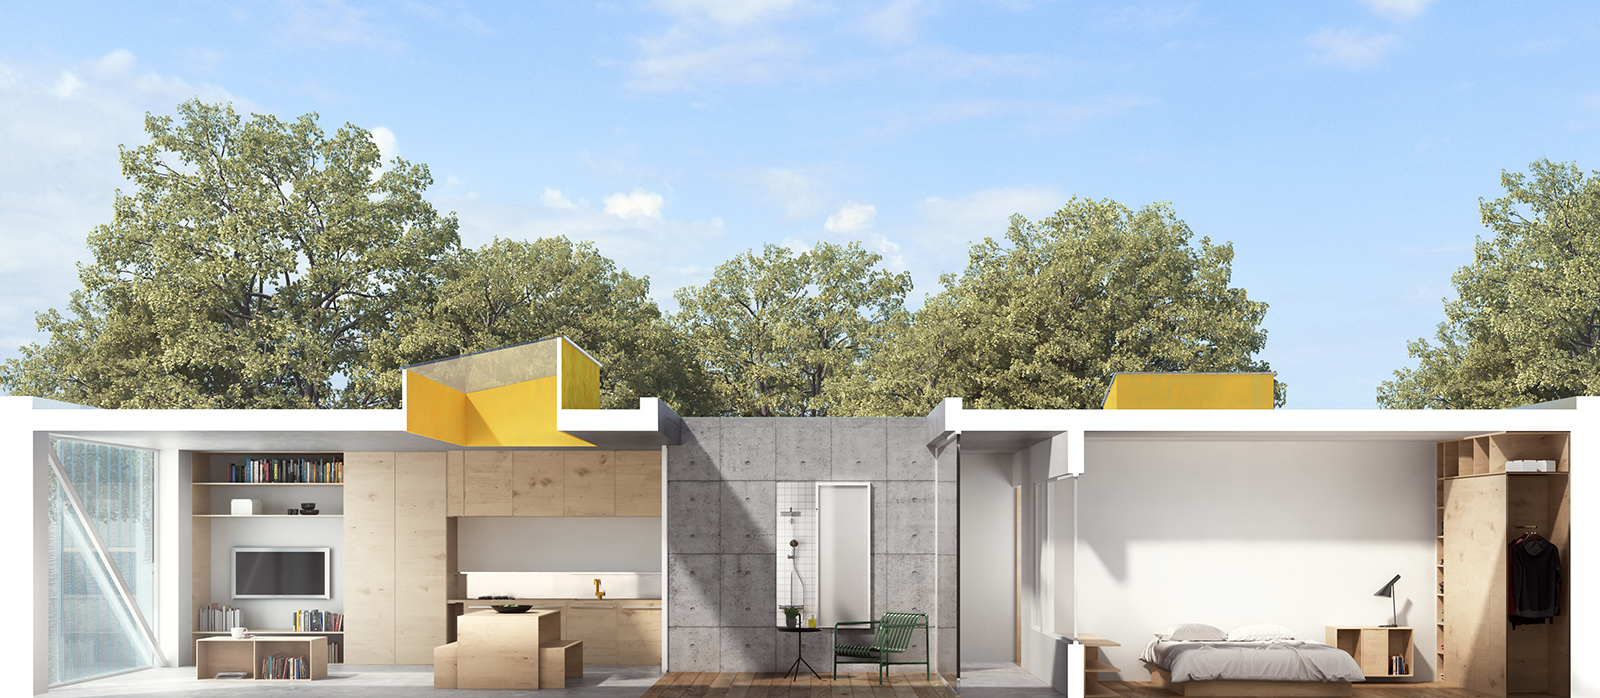 Property start-up Cube Haus taps award-winning British architects to create ‘infill’ prefabs